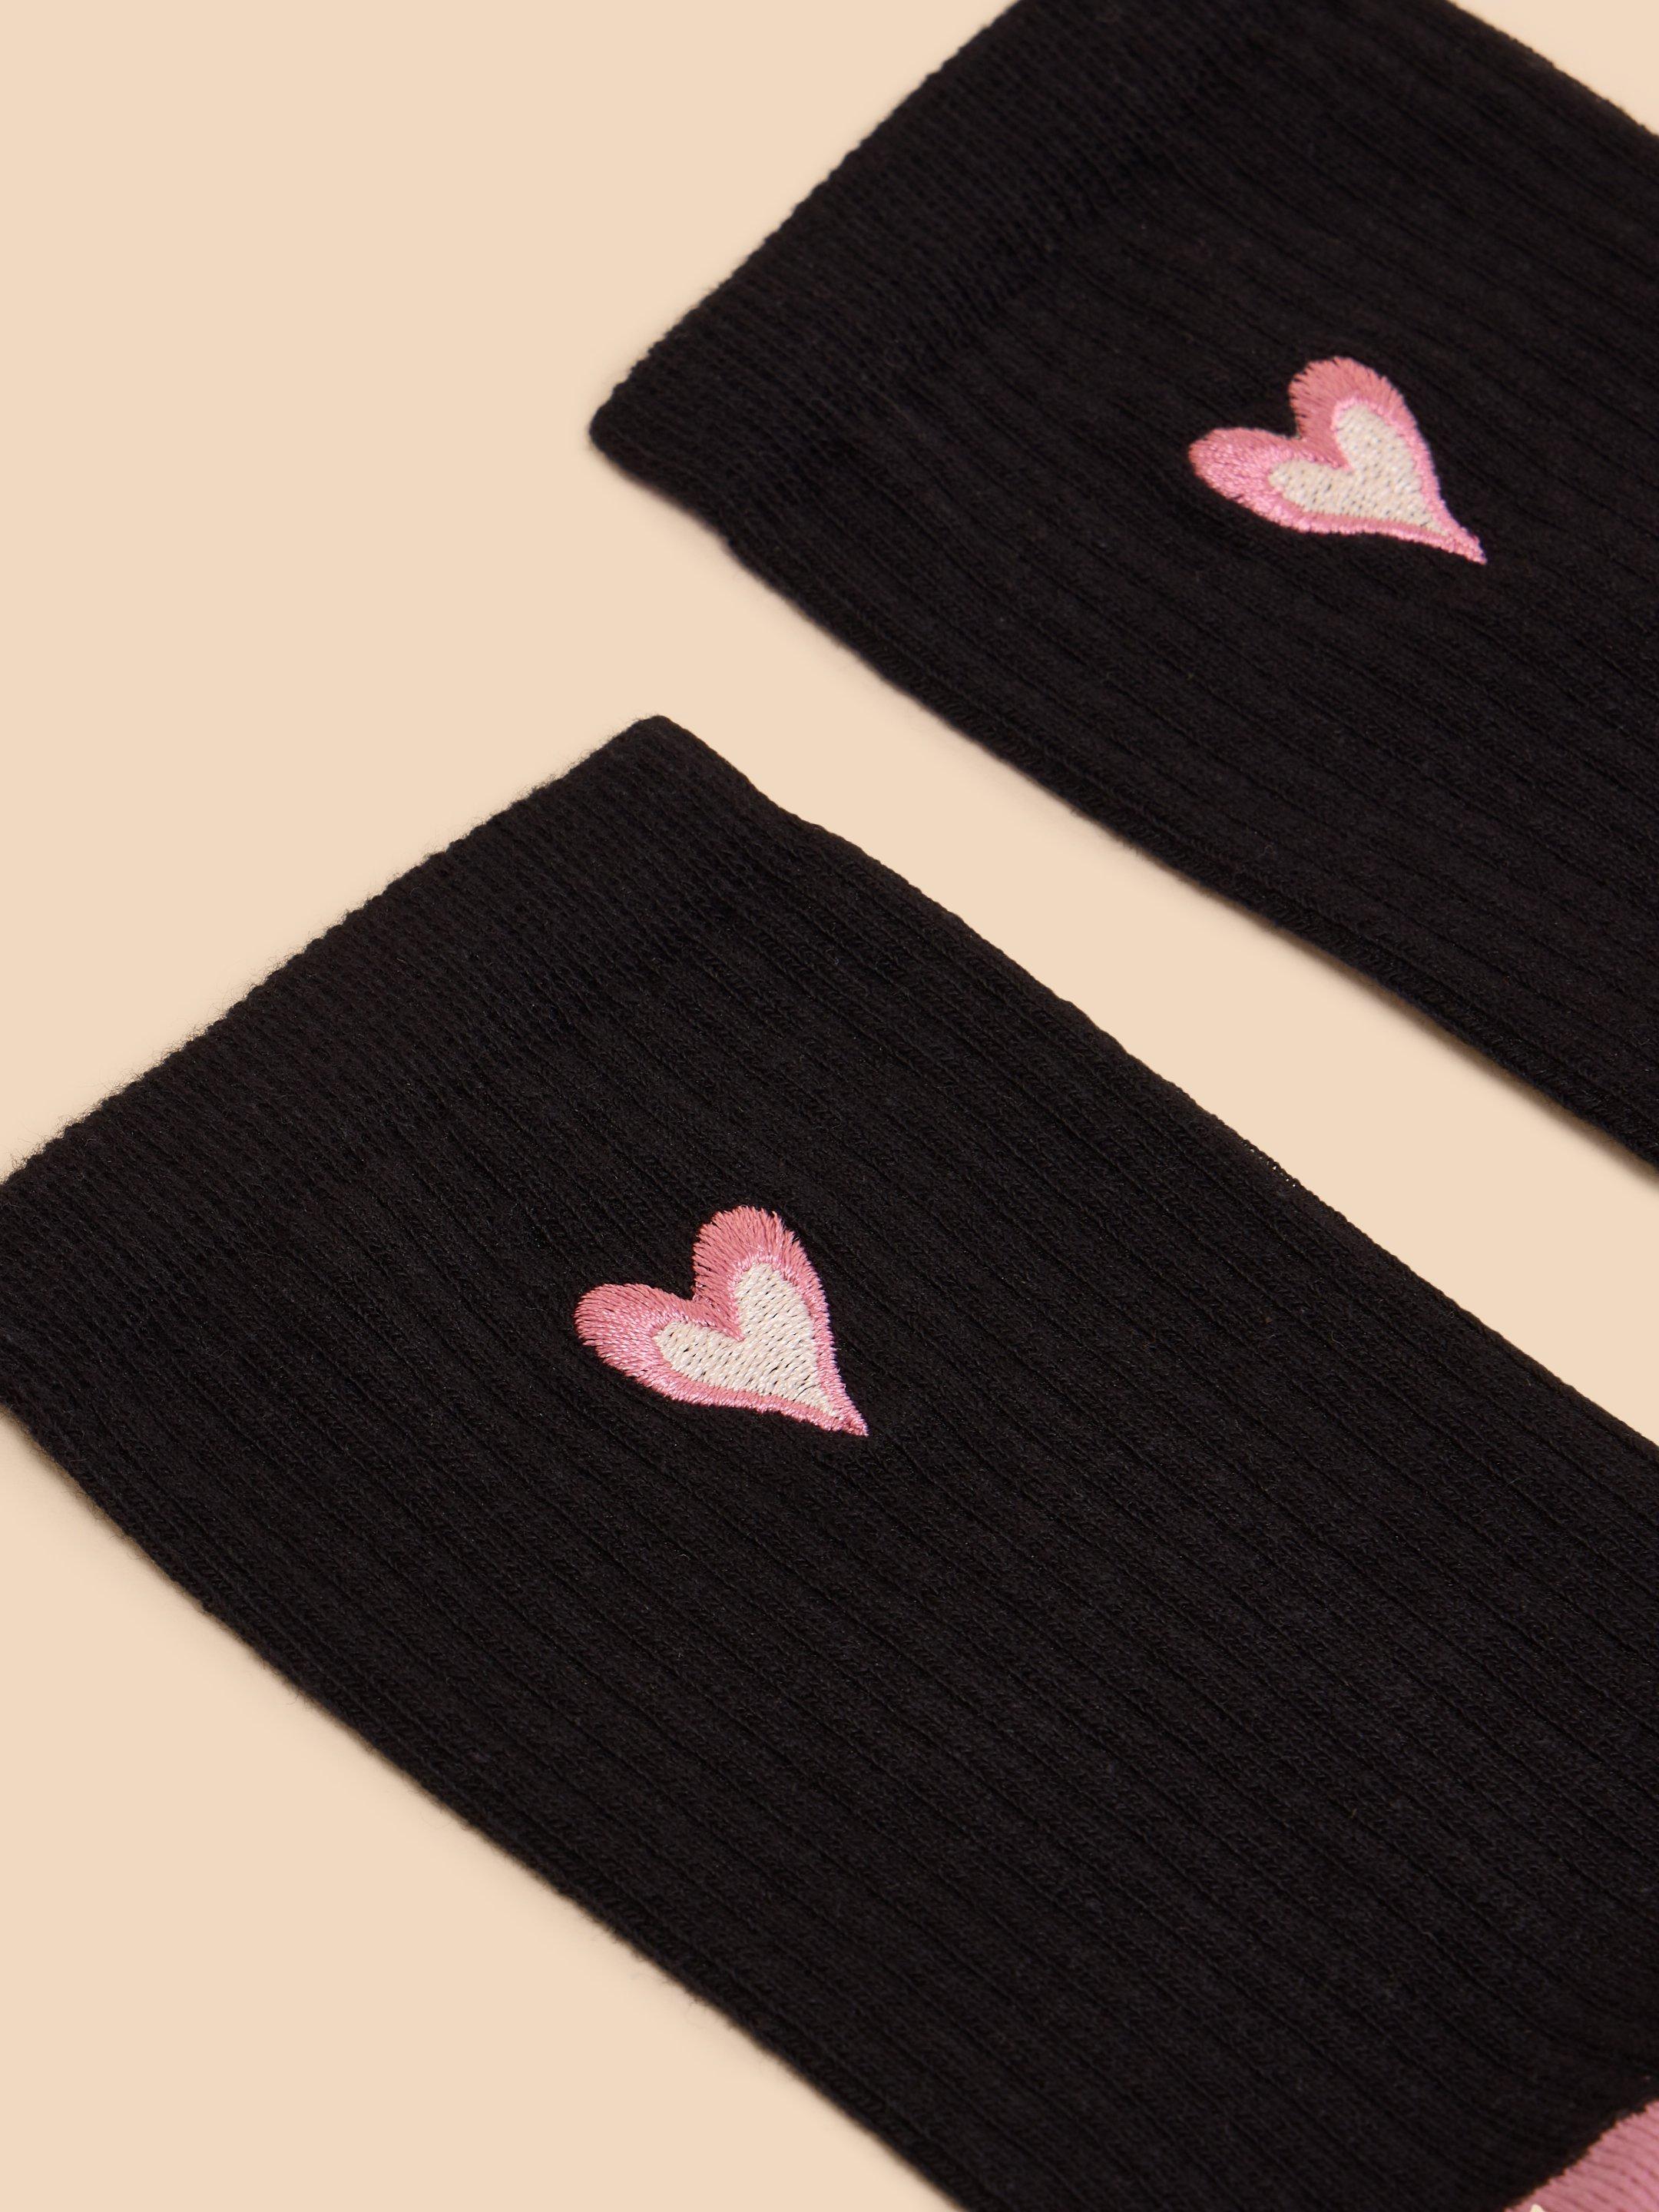 Embroidered Heart Rib Sock in PURE BLK - FLAT FRONT